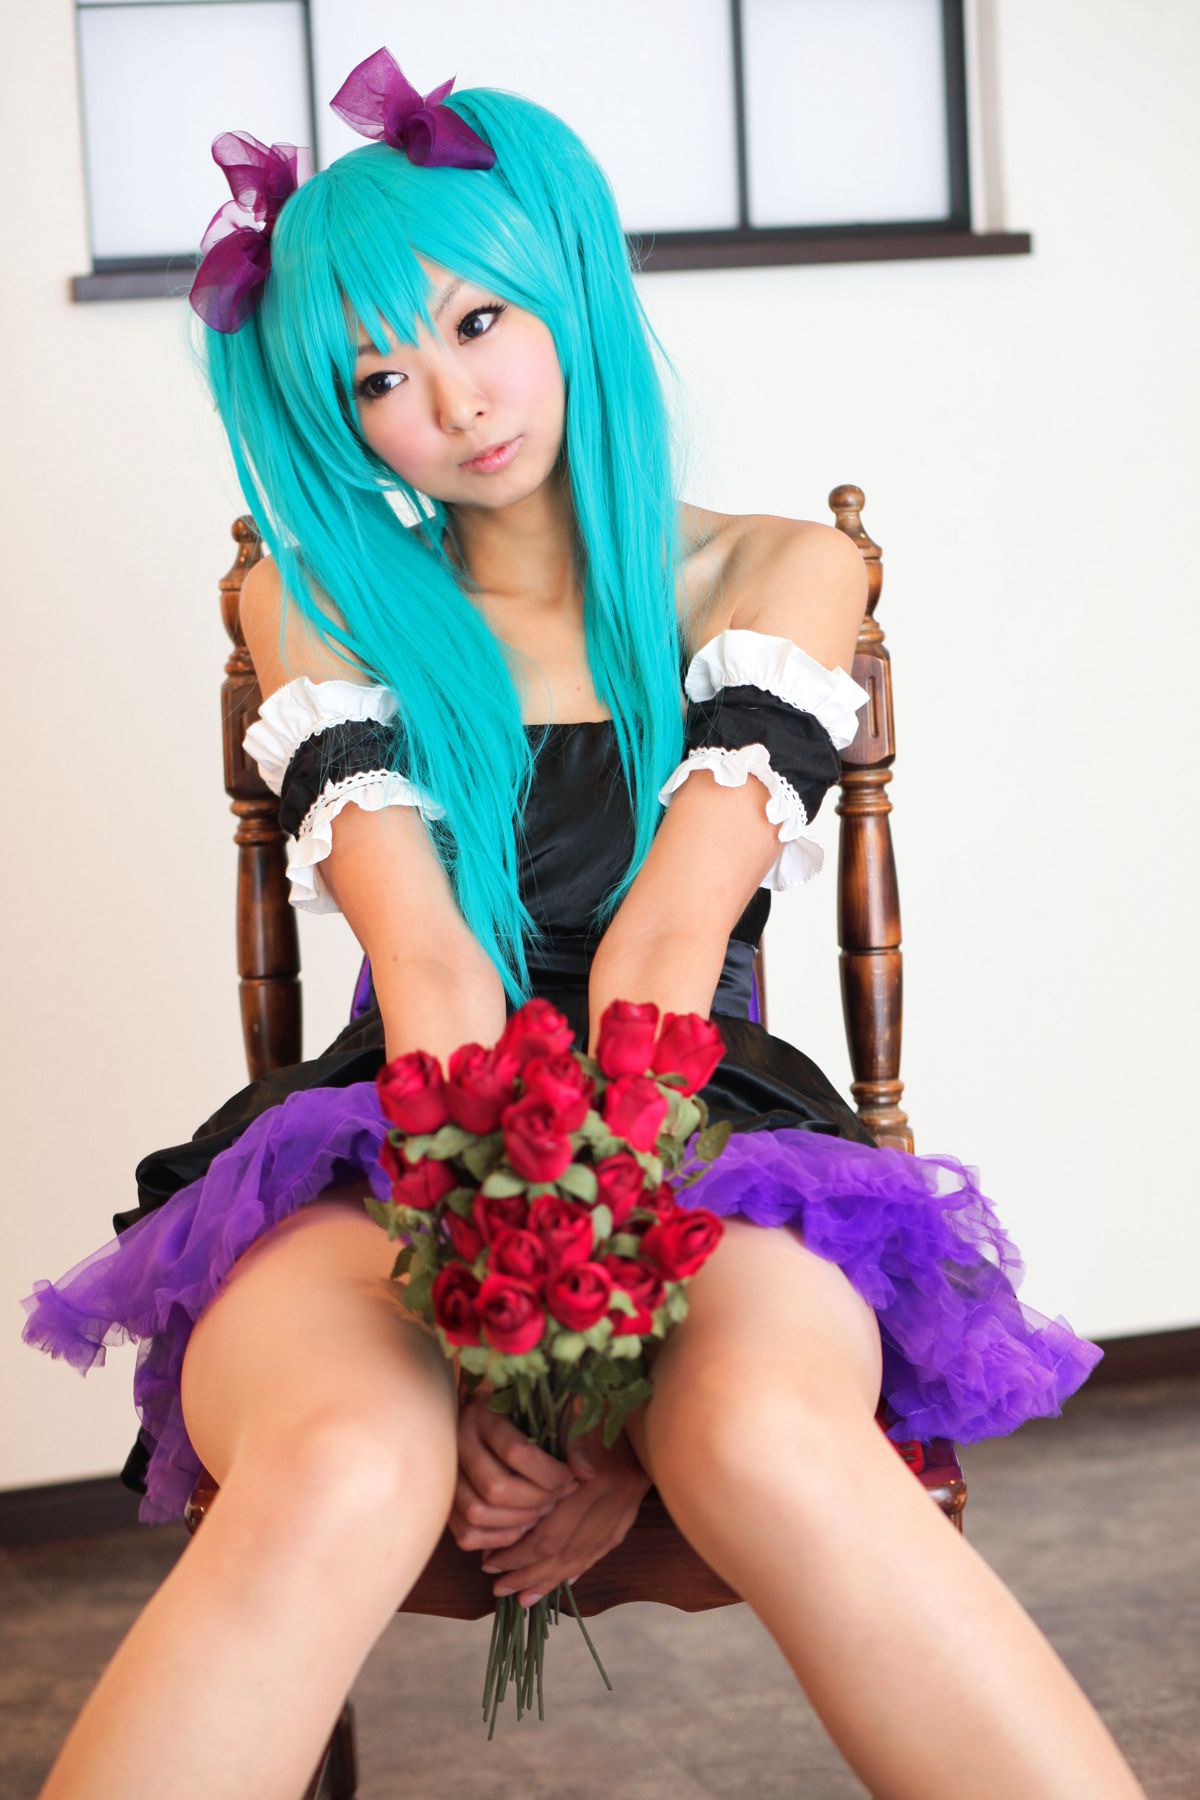 taotuhome[Cosplay] Necoco as Hatsune Miku from Vocaloid 套图第158张